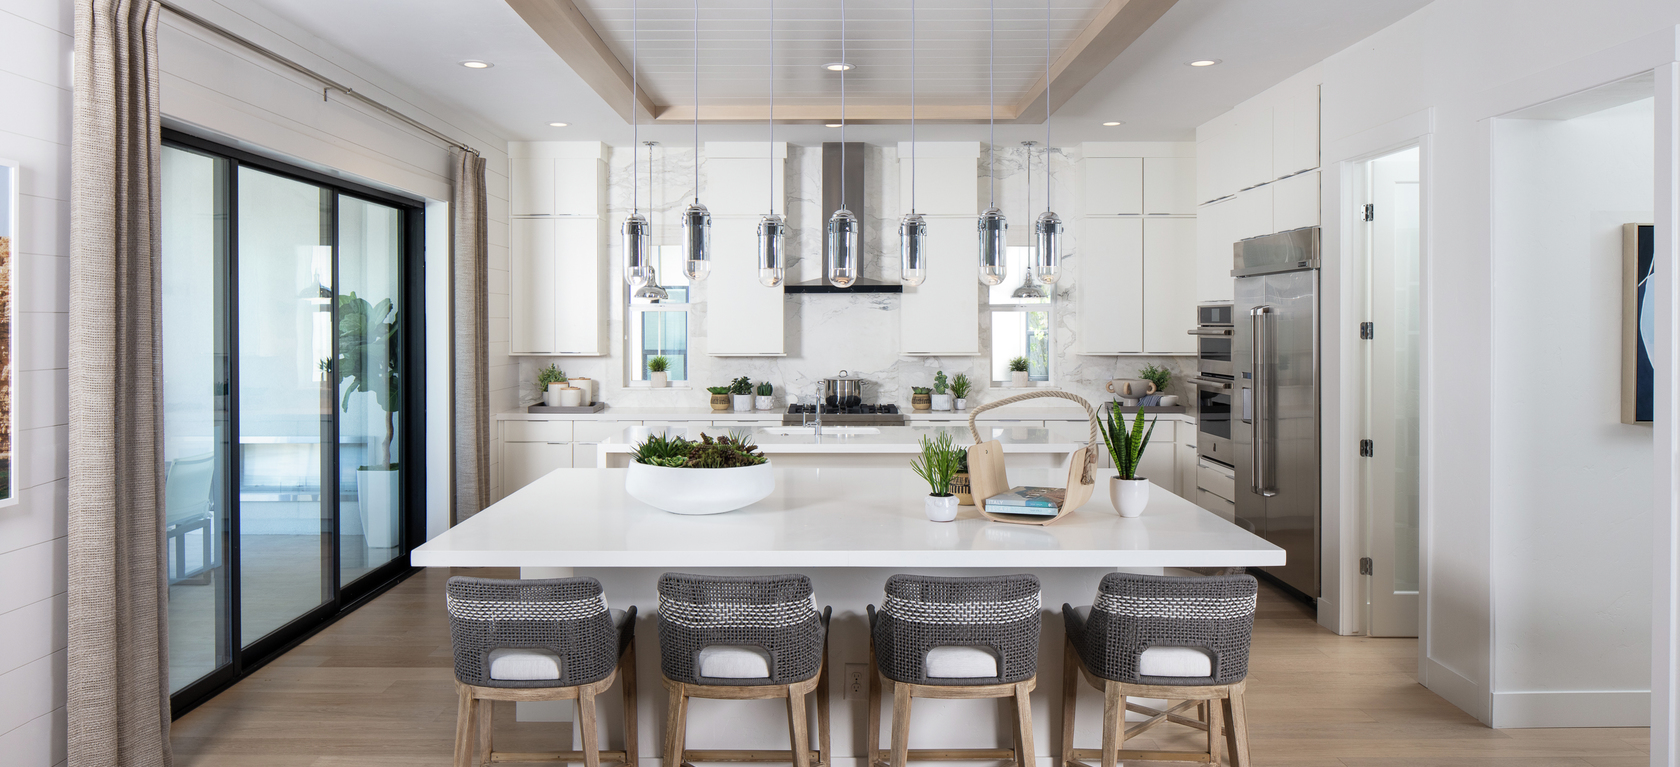 5 Kitchen Remodel Ideas For A Gourmet E